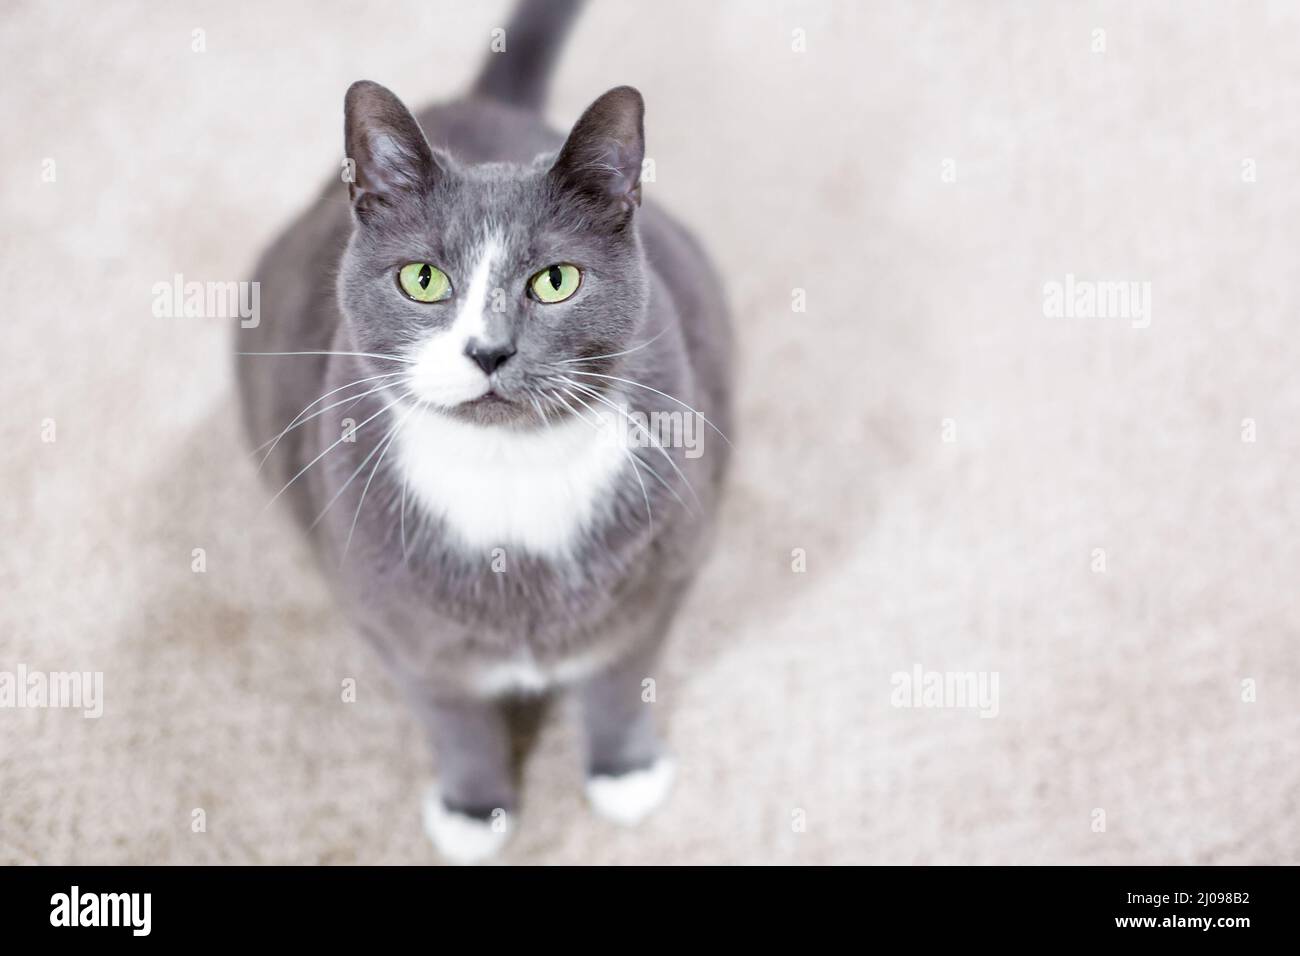 A gray and white shorthair cat with green eyes looking up at the camera Stock Photo